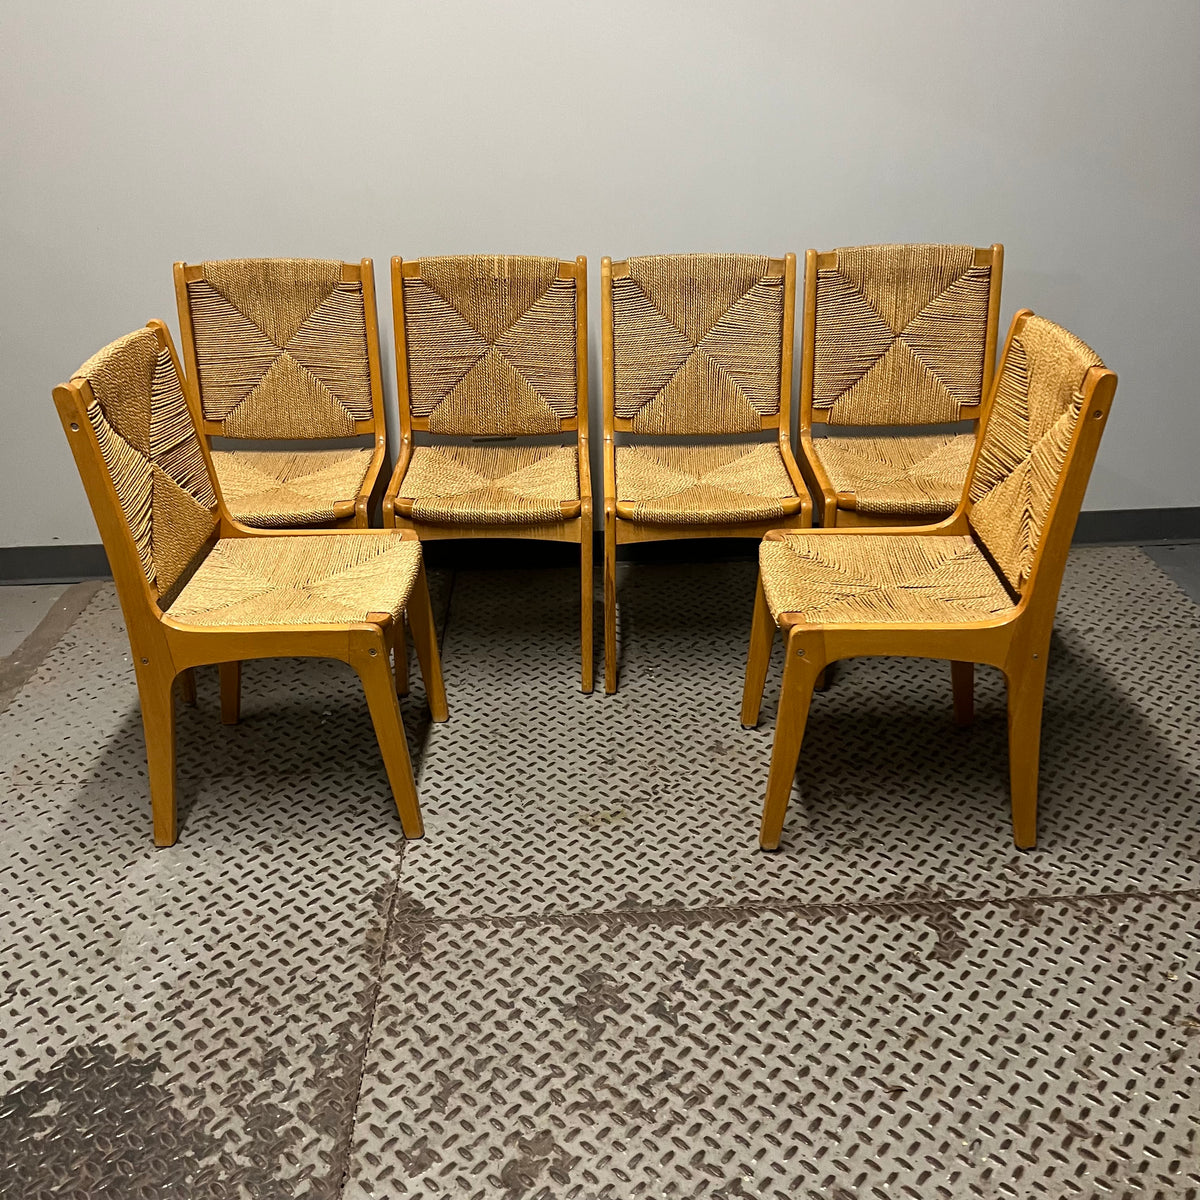 Set of 6 dining chairs with woven rush seats and backs.  Mid-century modern meets French country.  Light wood.  Vintage with some imperfections.